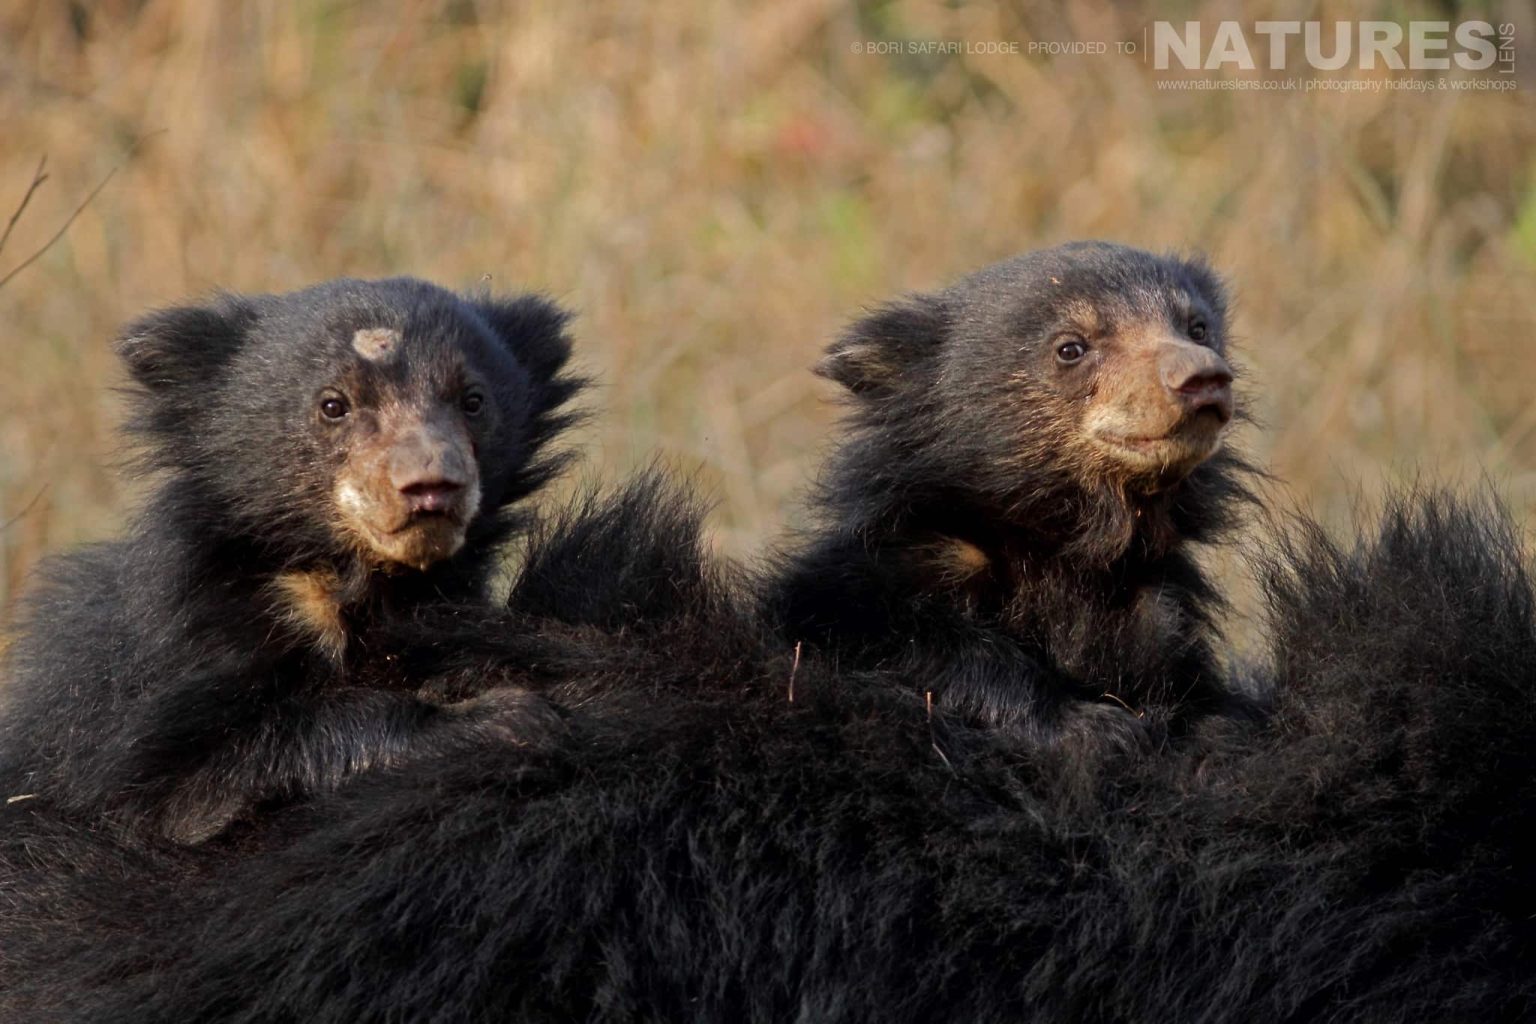 Sloth Bears Photographed Within The Bori Wildlife Reserve One Of The Locations Used During The Natureslens Wildlife Of Madhya Pradesh Photography Holiday